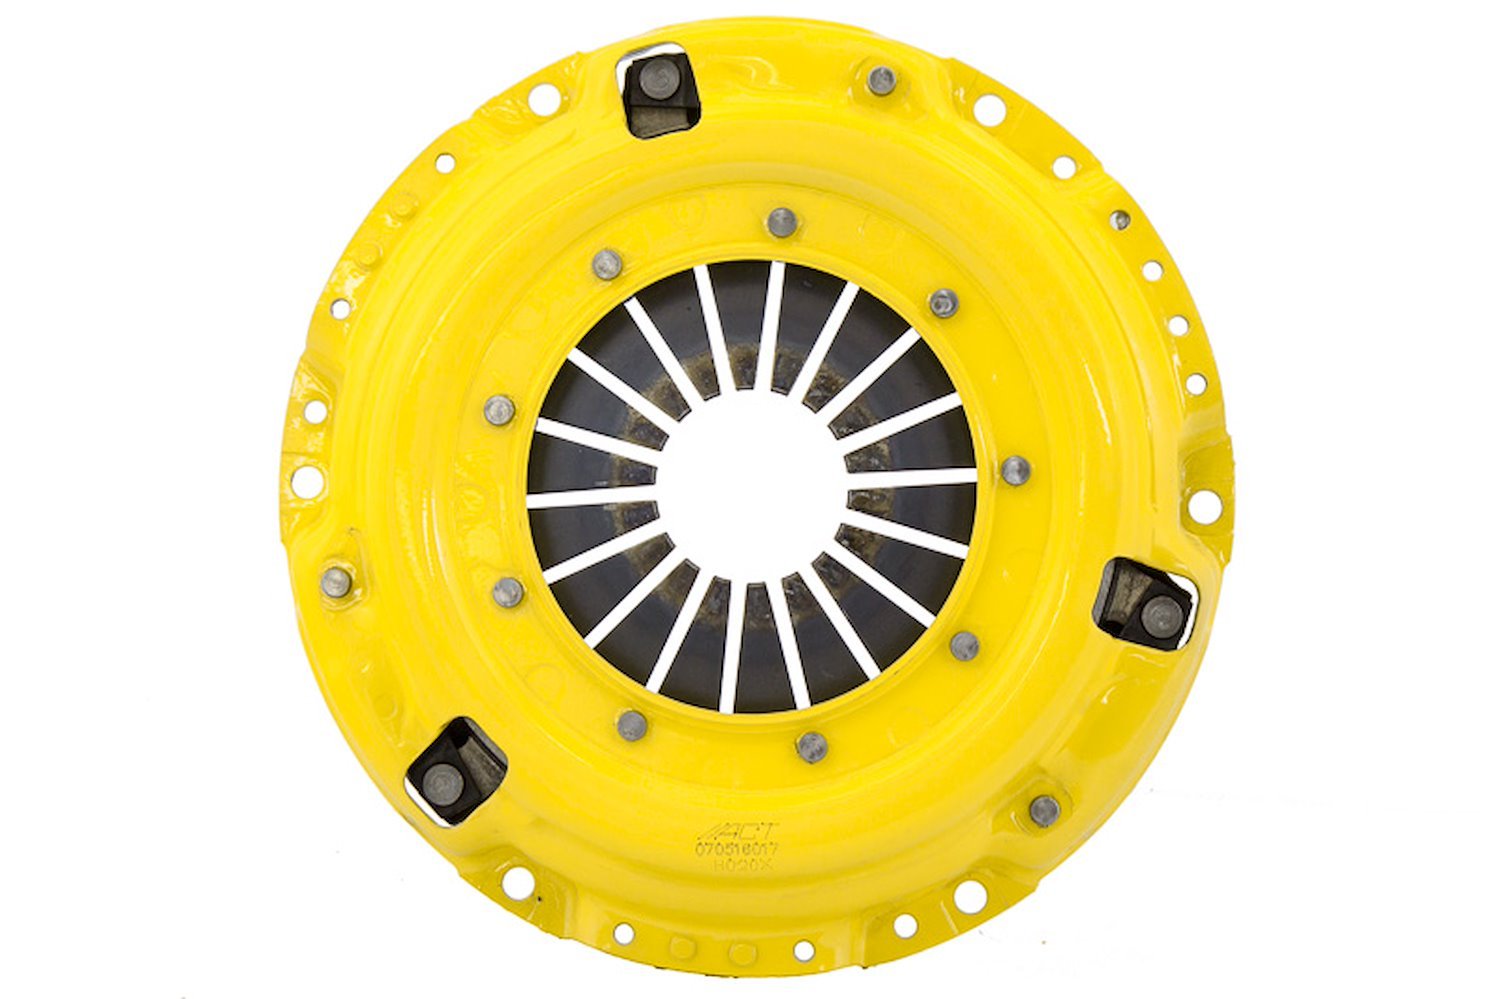 Xtreme Transmission Clutch Pressure Plate Fits Select Acura/Honda